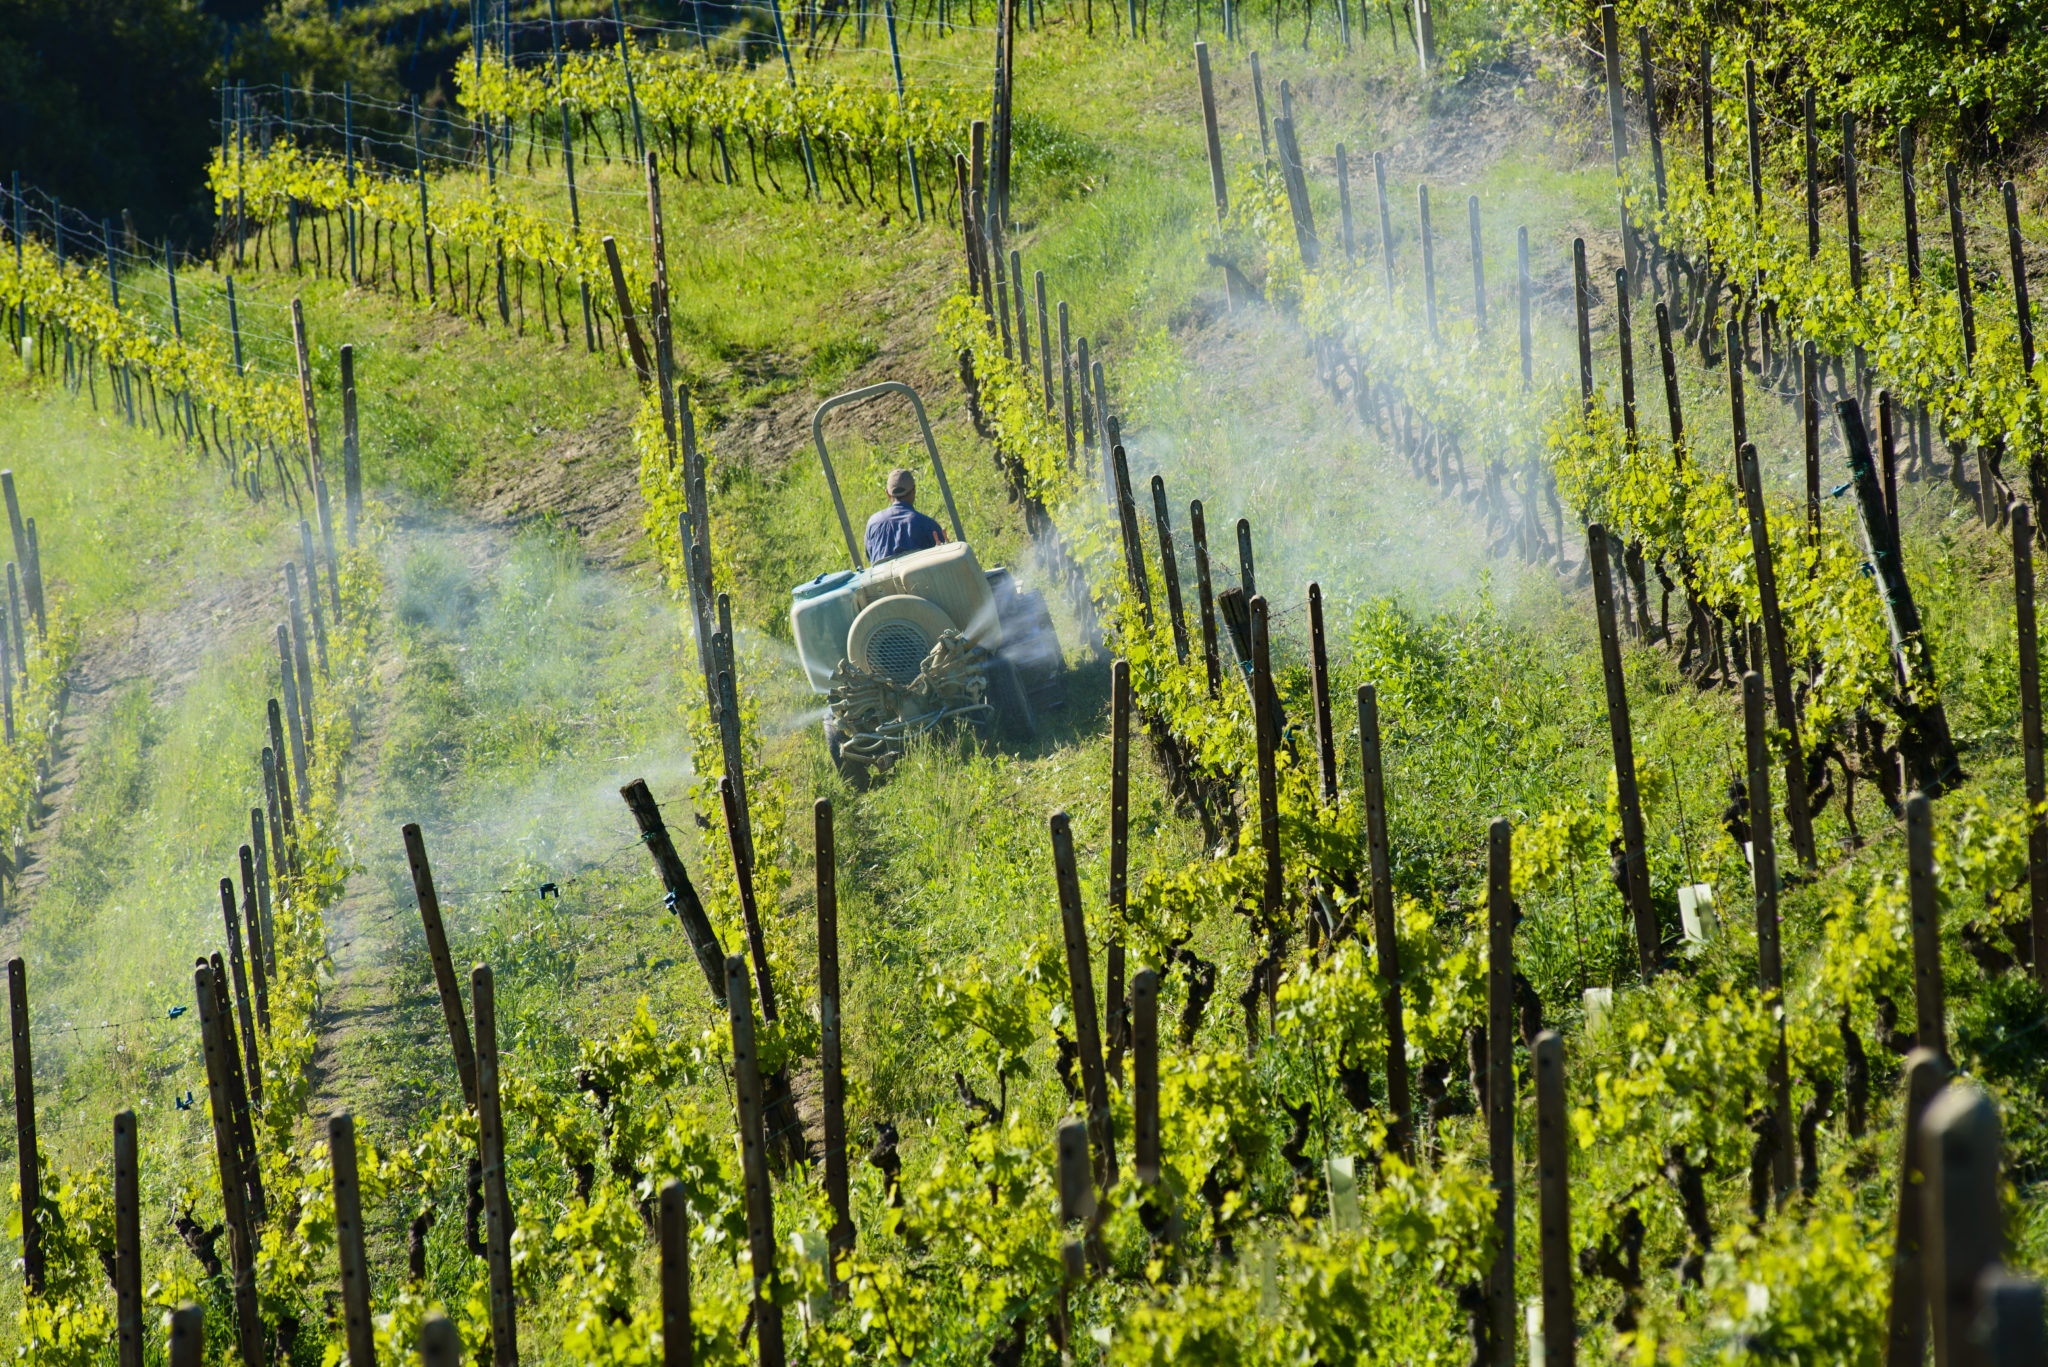 Piedmont, Italy - April 29, 2017: Farmer with tractor between vineyards for the chemical treatment of grapes